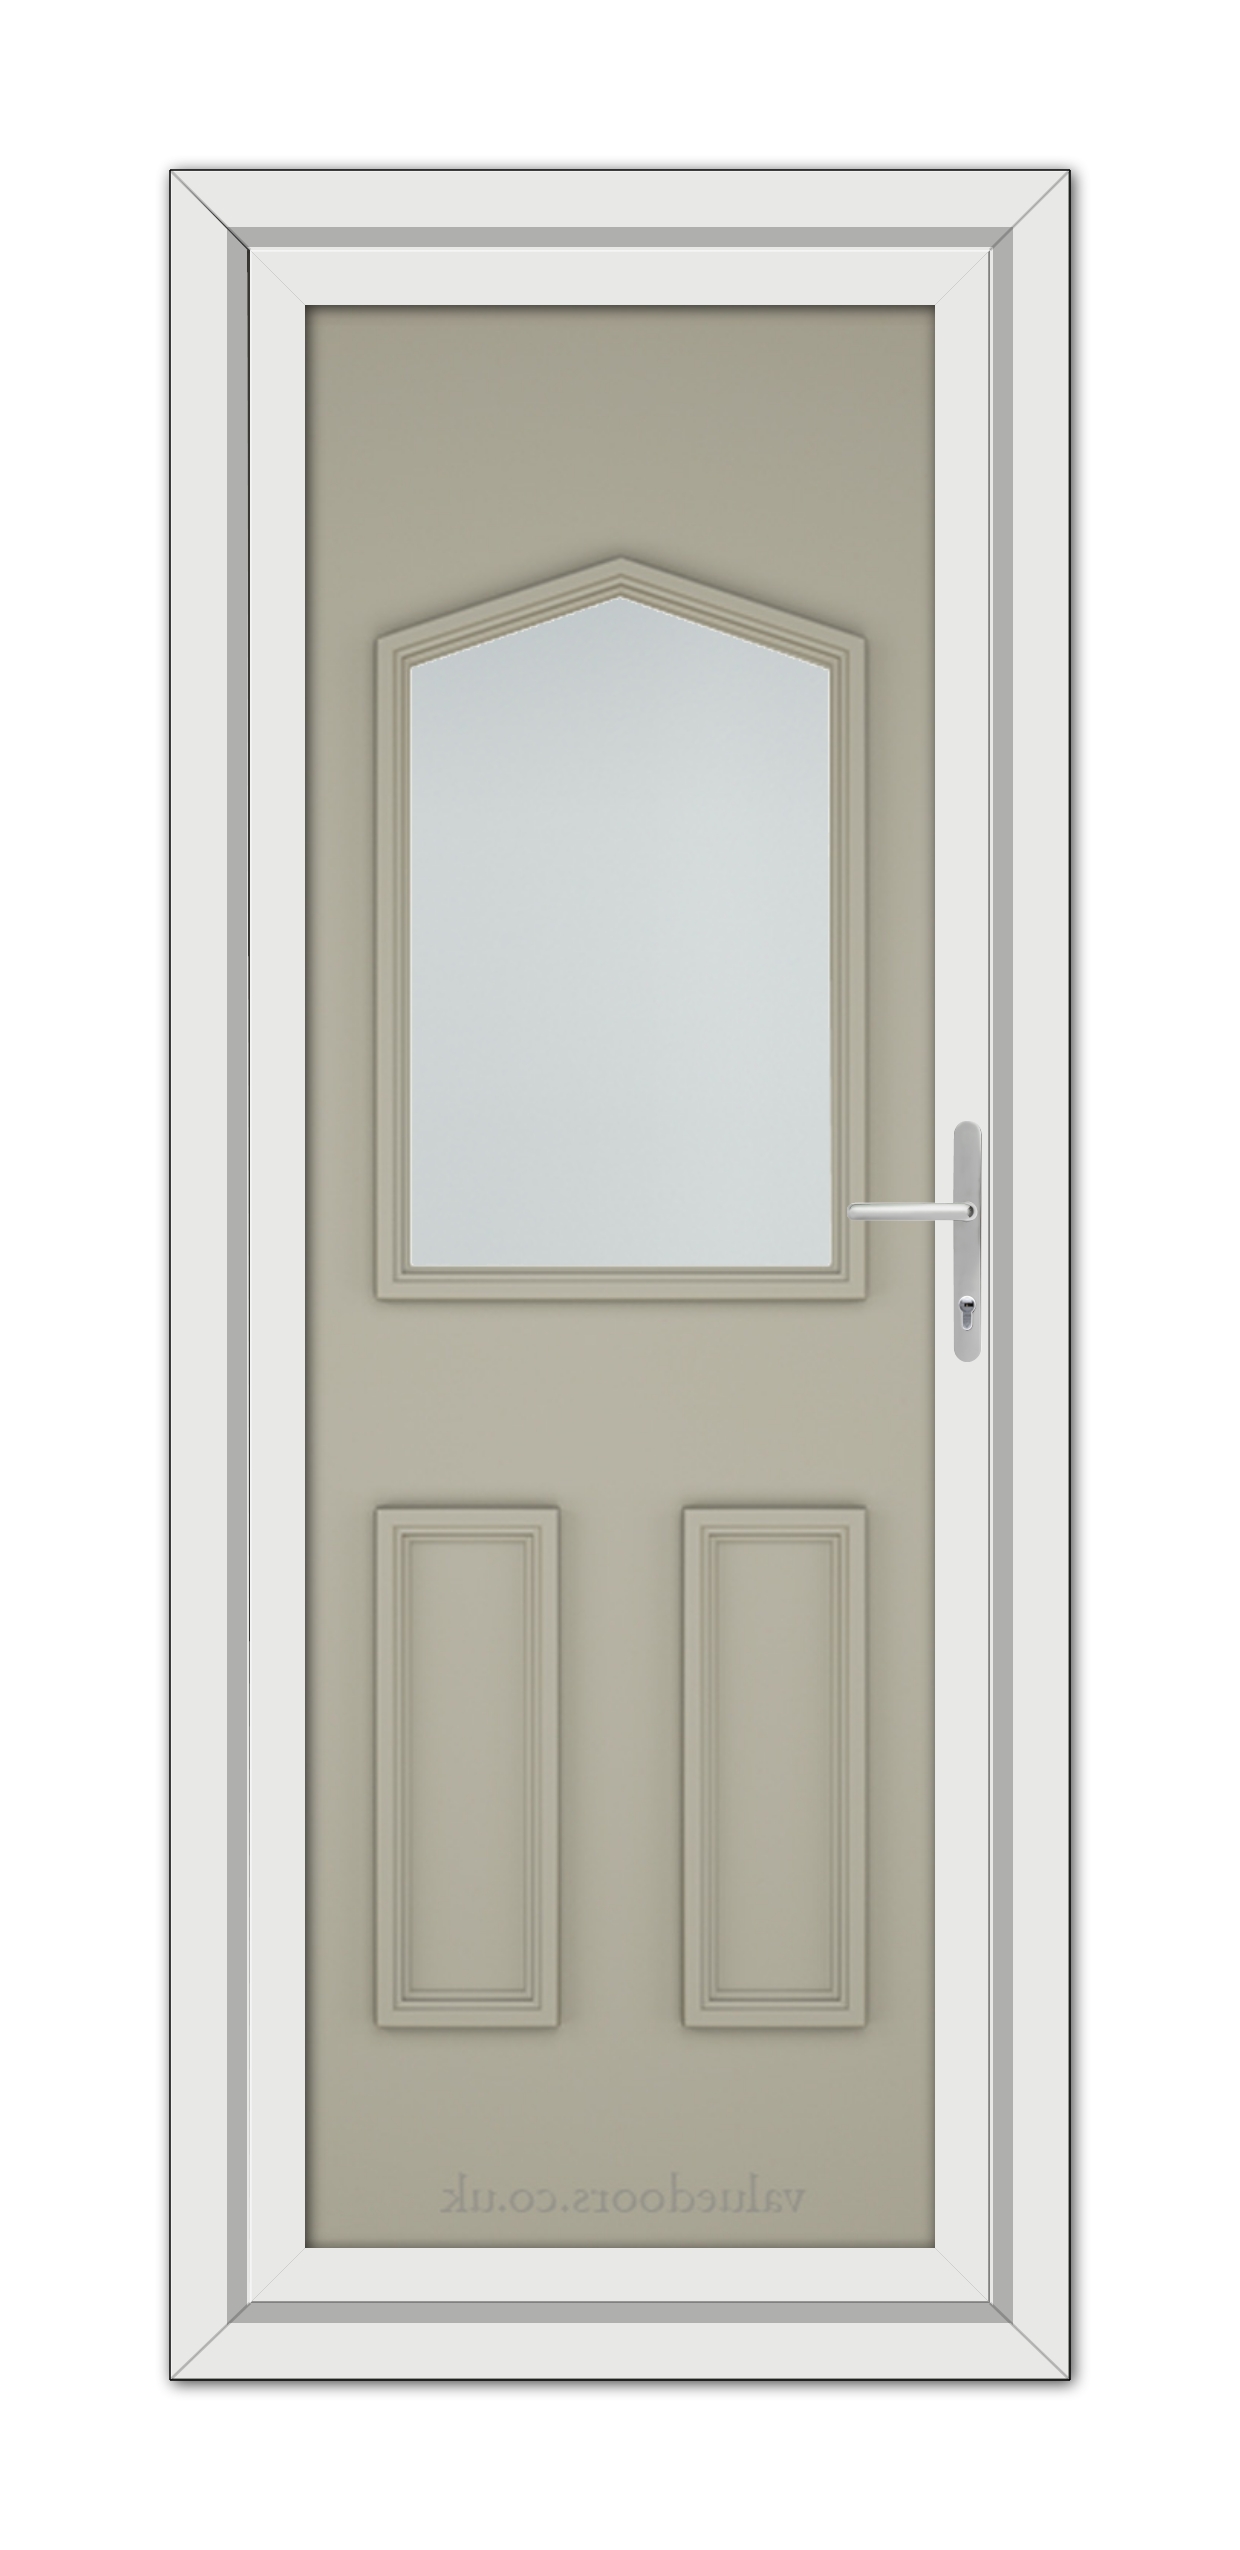 A vertical image showing a Pebble Grey Oxford uPVC Door featuring a top arch window, two recessed panels, and a metal handle on the right.